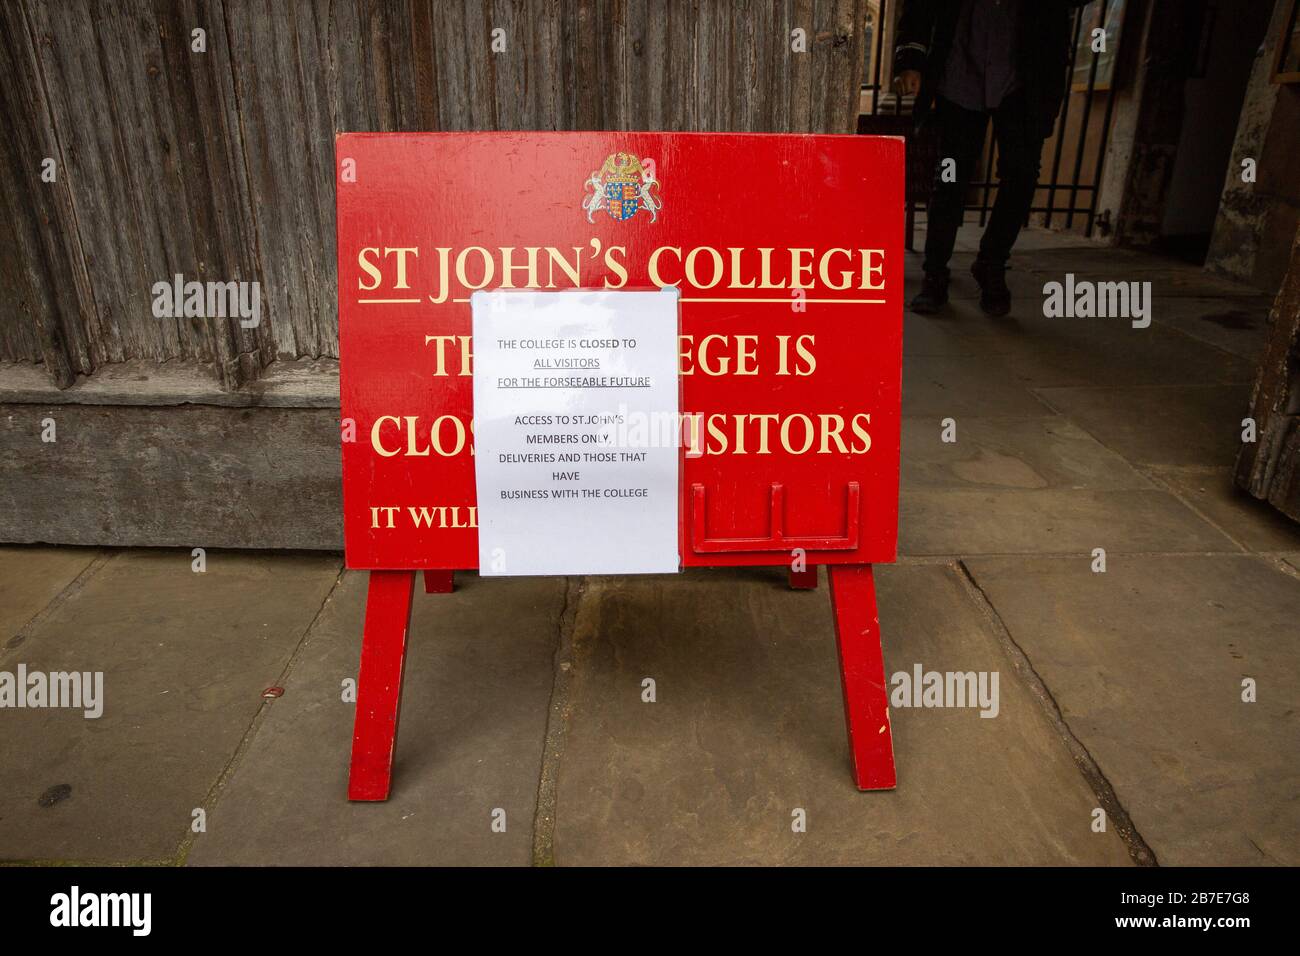 Picture dated March 14th shows St JohnÕs College closed in Cambridge on Saturday due to the Coronavirus outbreak.   The world-famous university city of Cambridge was empty this morning (Sat) with shoppers and tourists staying away as coronavirus spreads across Britain.  The River Cam in the historic city centre was also quiet with punt operators suffering from the lack of Chinese and Japanese tourists. The picturesque Backs would normally be packed with punts on a sunny spring day, but today there were only a handful on the river. Stock Photo